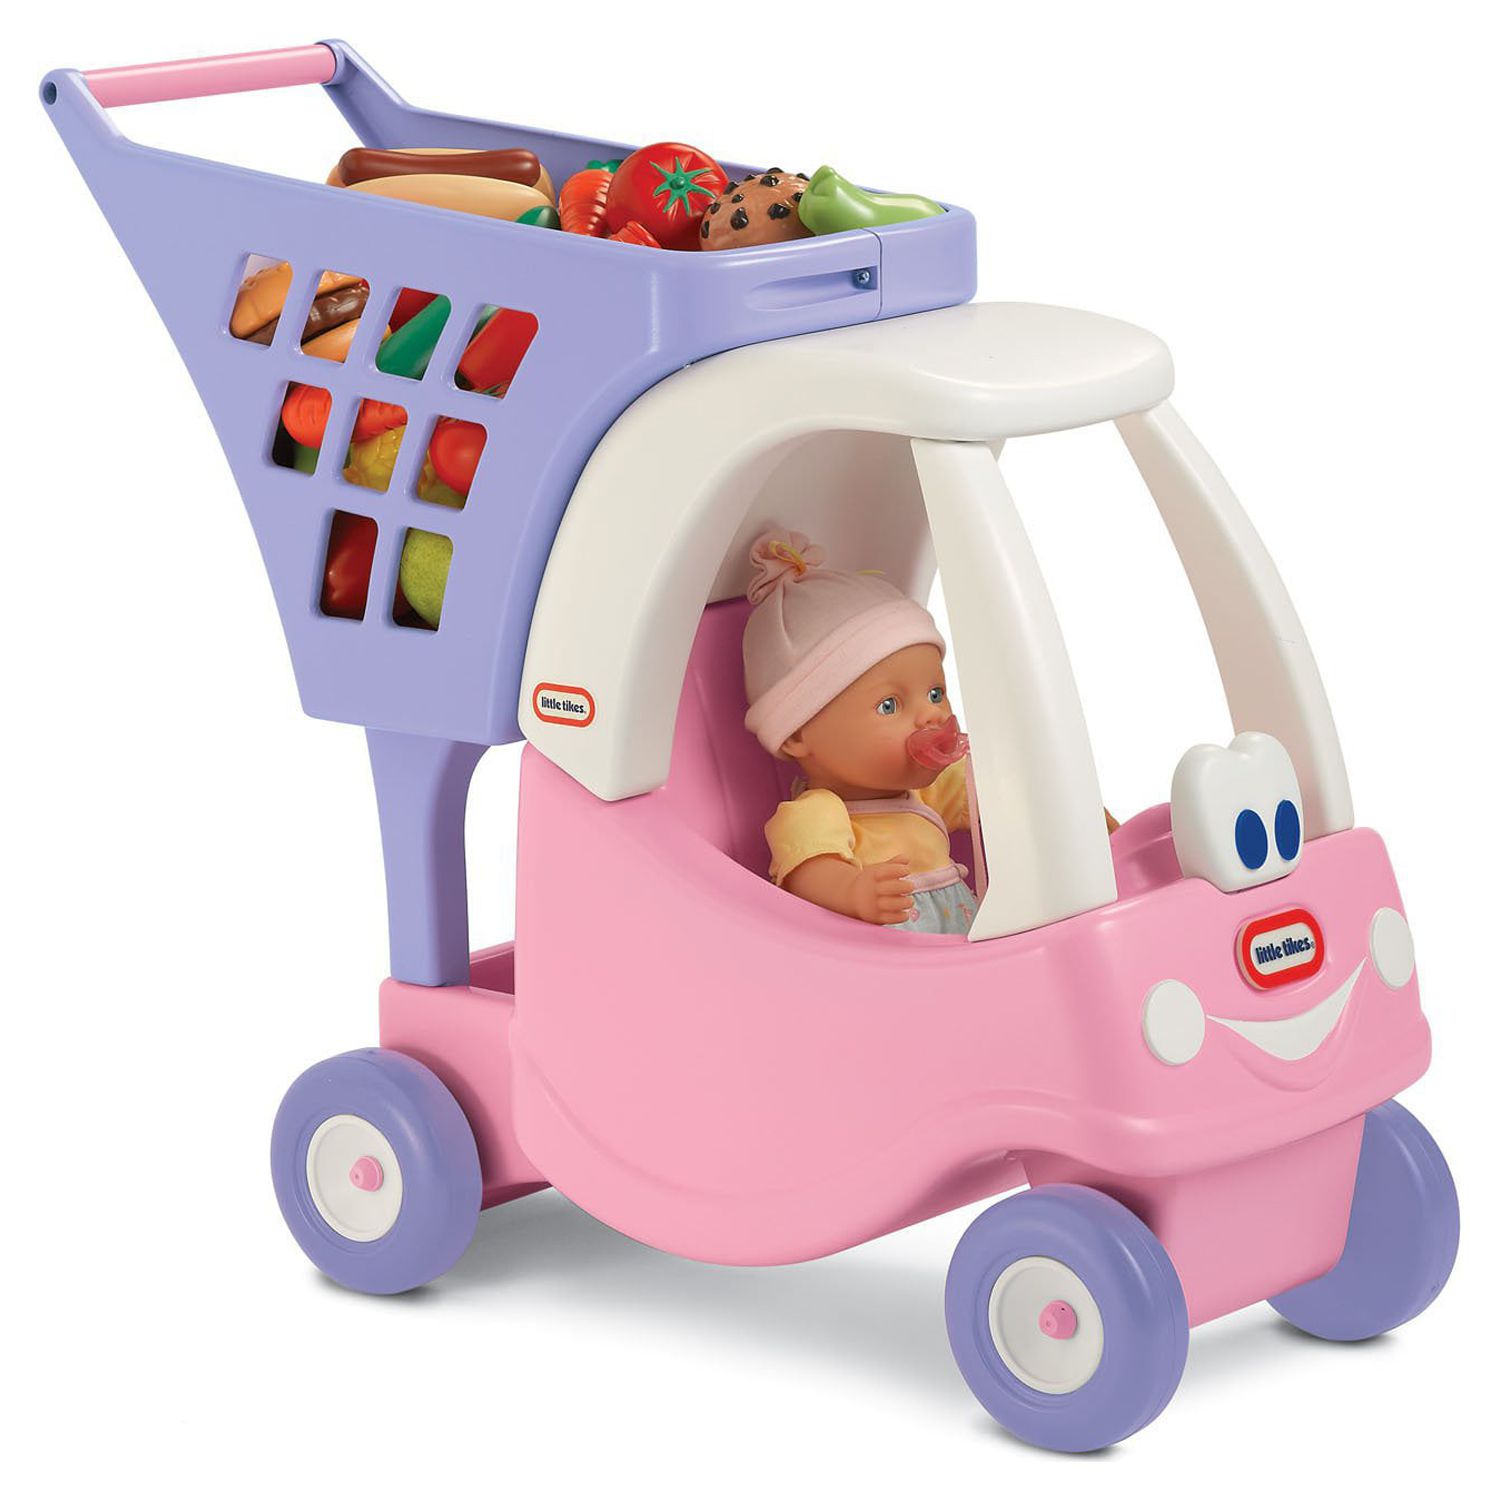 Little Tikes Princess Cozy Shopping Cart - image 4 of 6